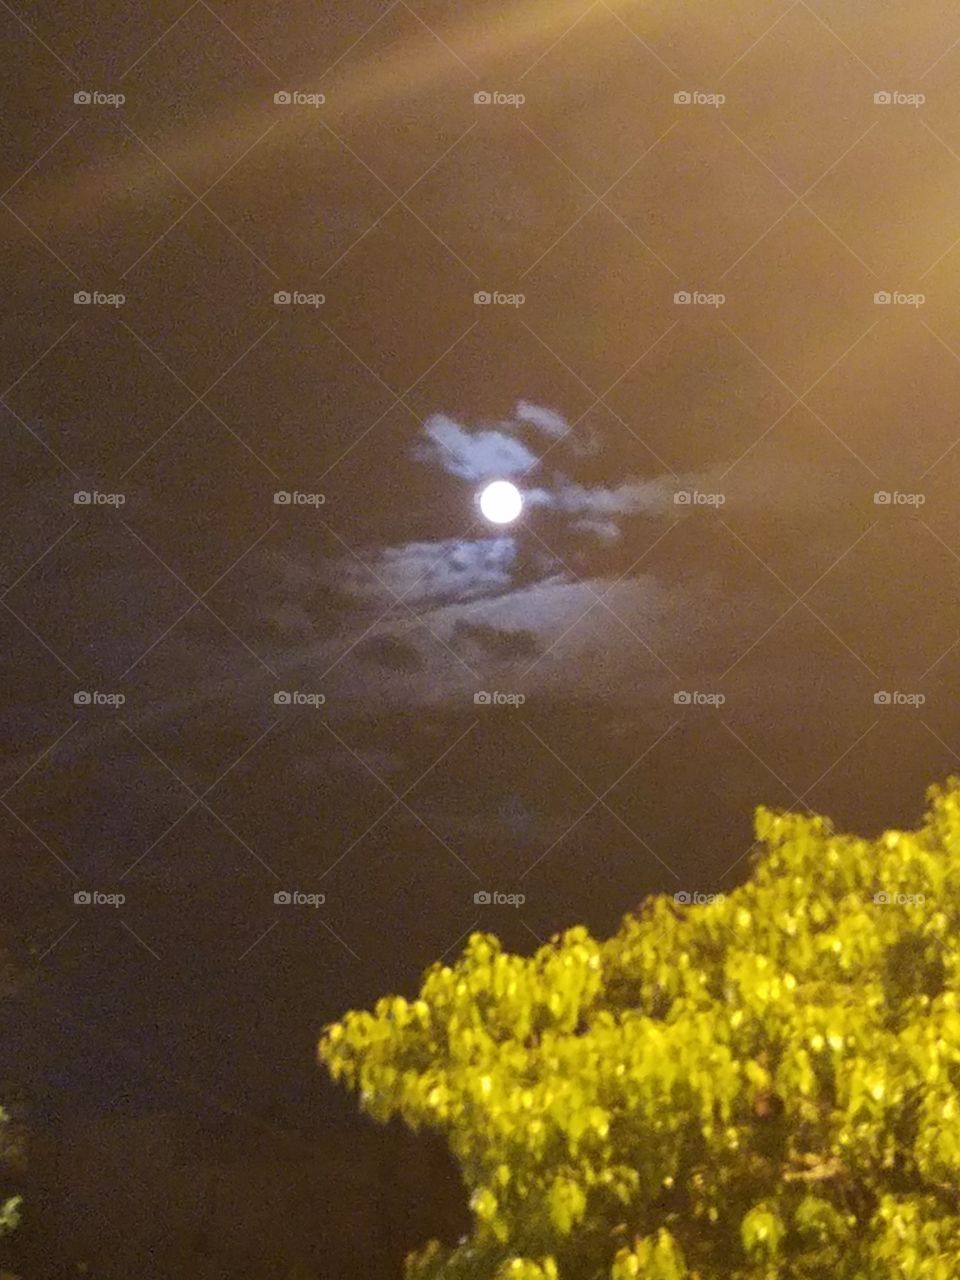 A nighttime sky depicting clouds surrounding a full moon with a tree just shy in the photo.